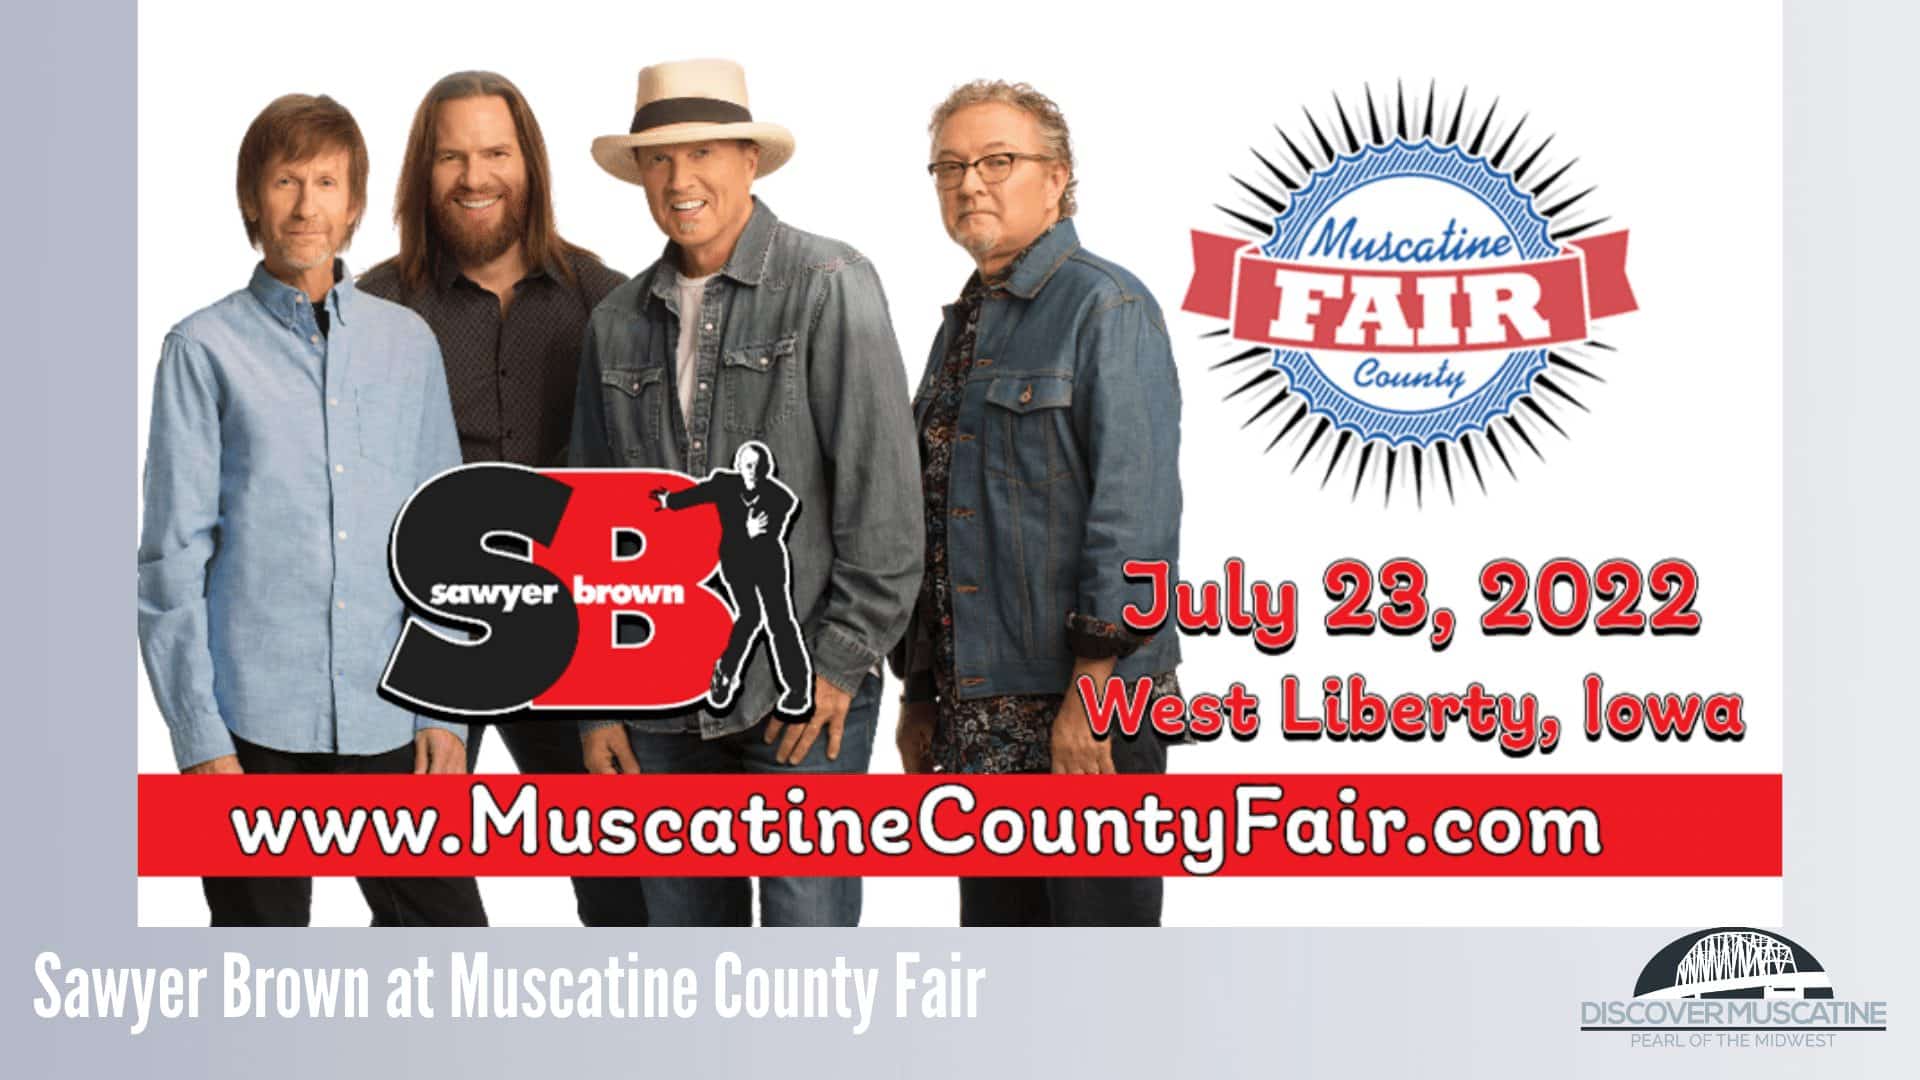 Sawyer Brown at Muscatine County Fair Discover Muscatine